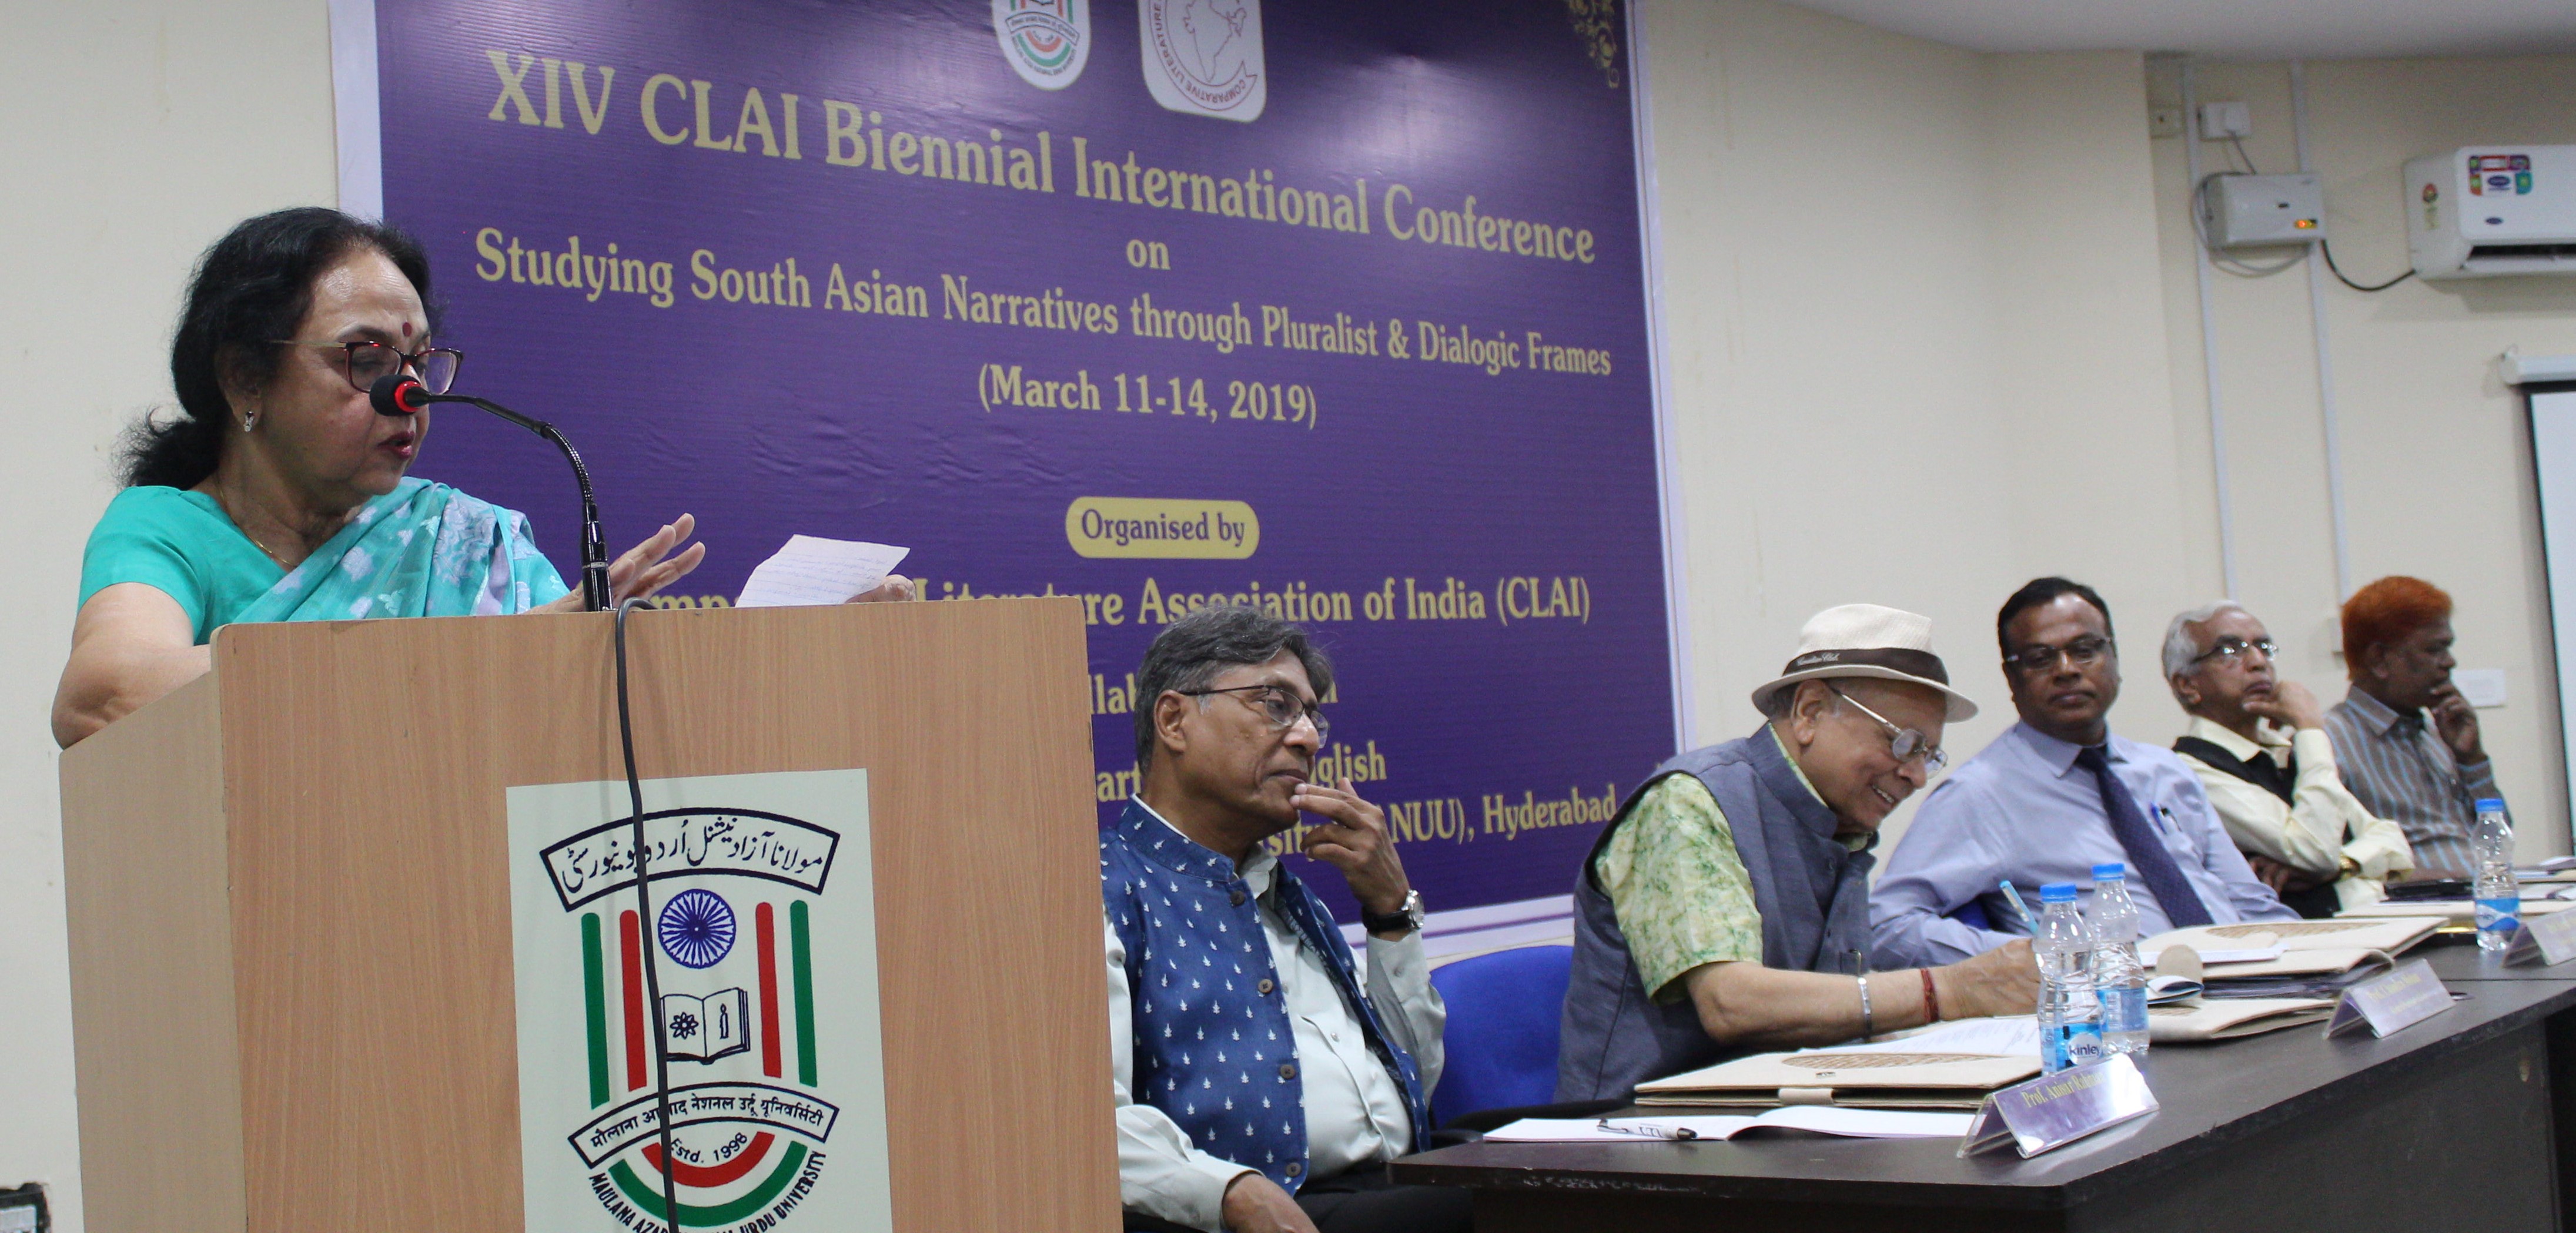 India’s way of teaching and learning is dialogic says Prof Sharma in CLAI Conference